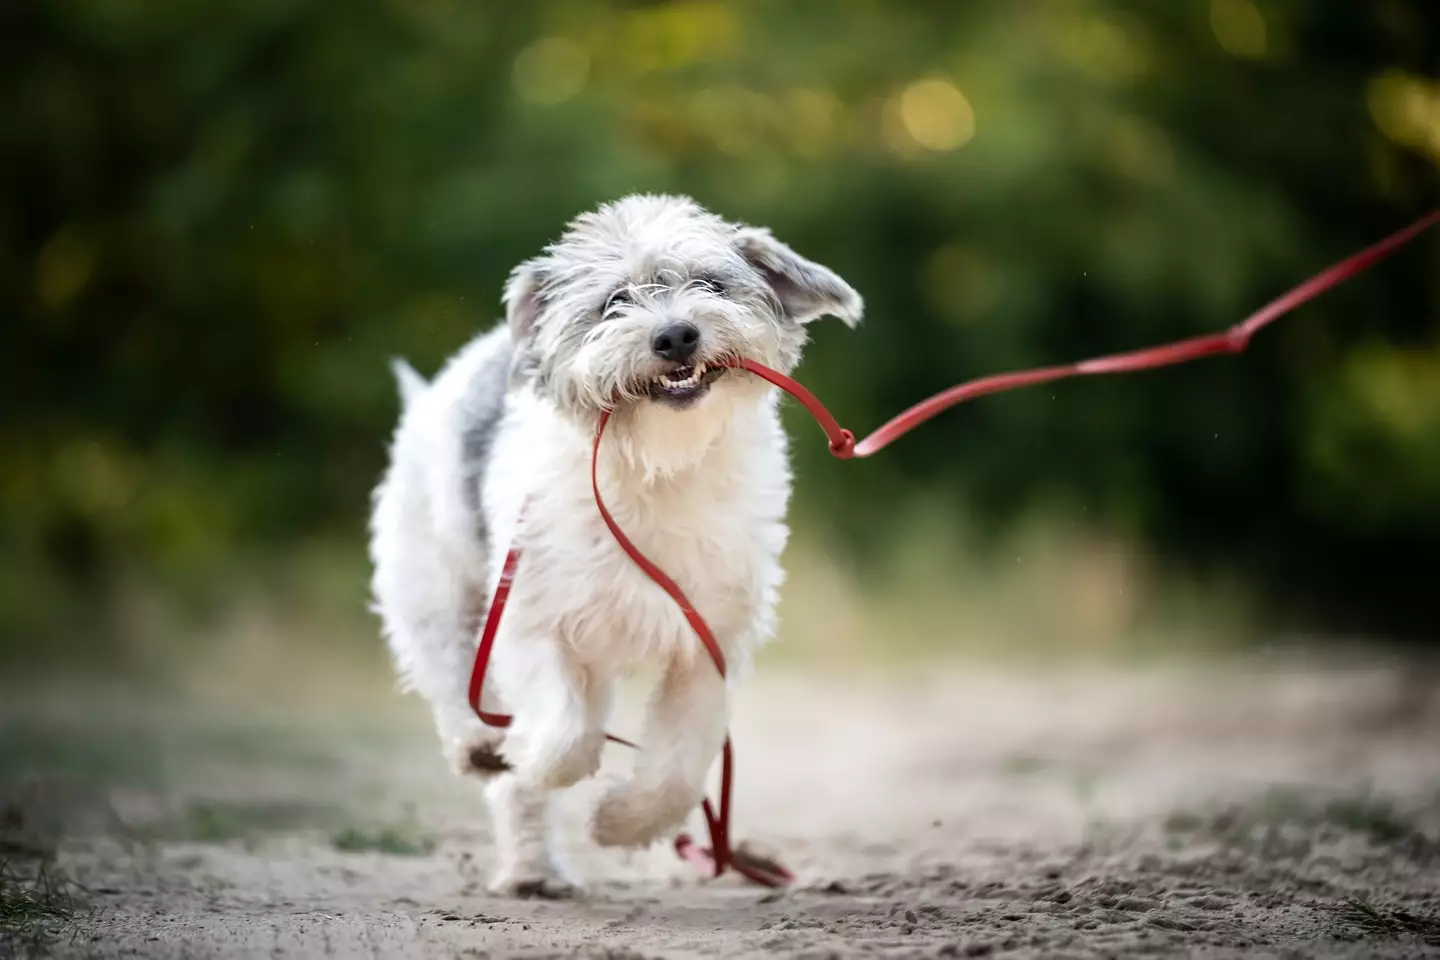 There's ways we can protect our pets this summer. (Anita Kot/Getty Stock)